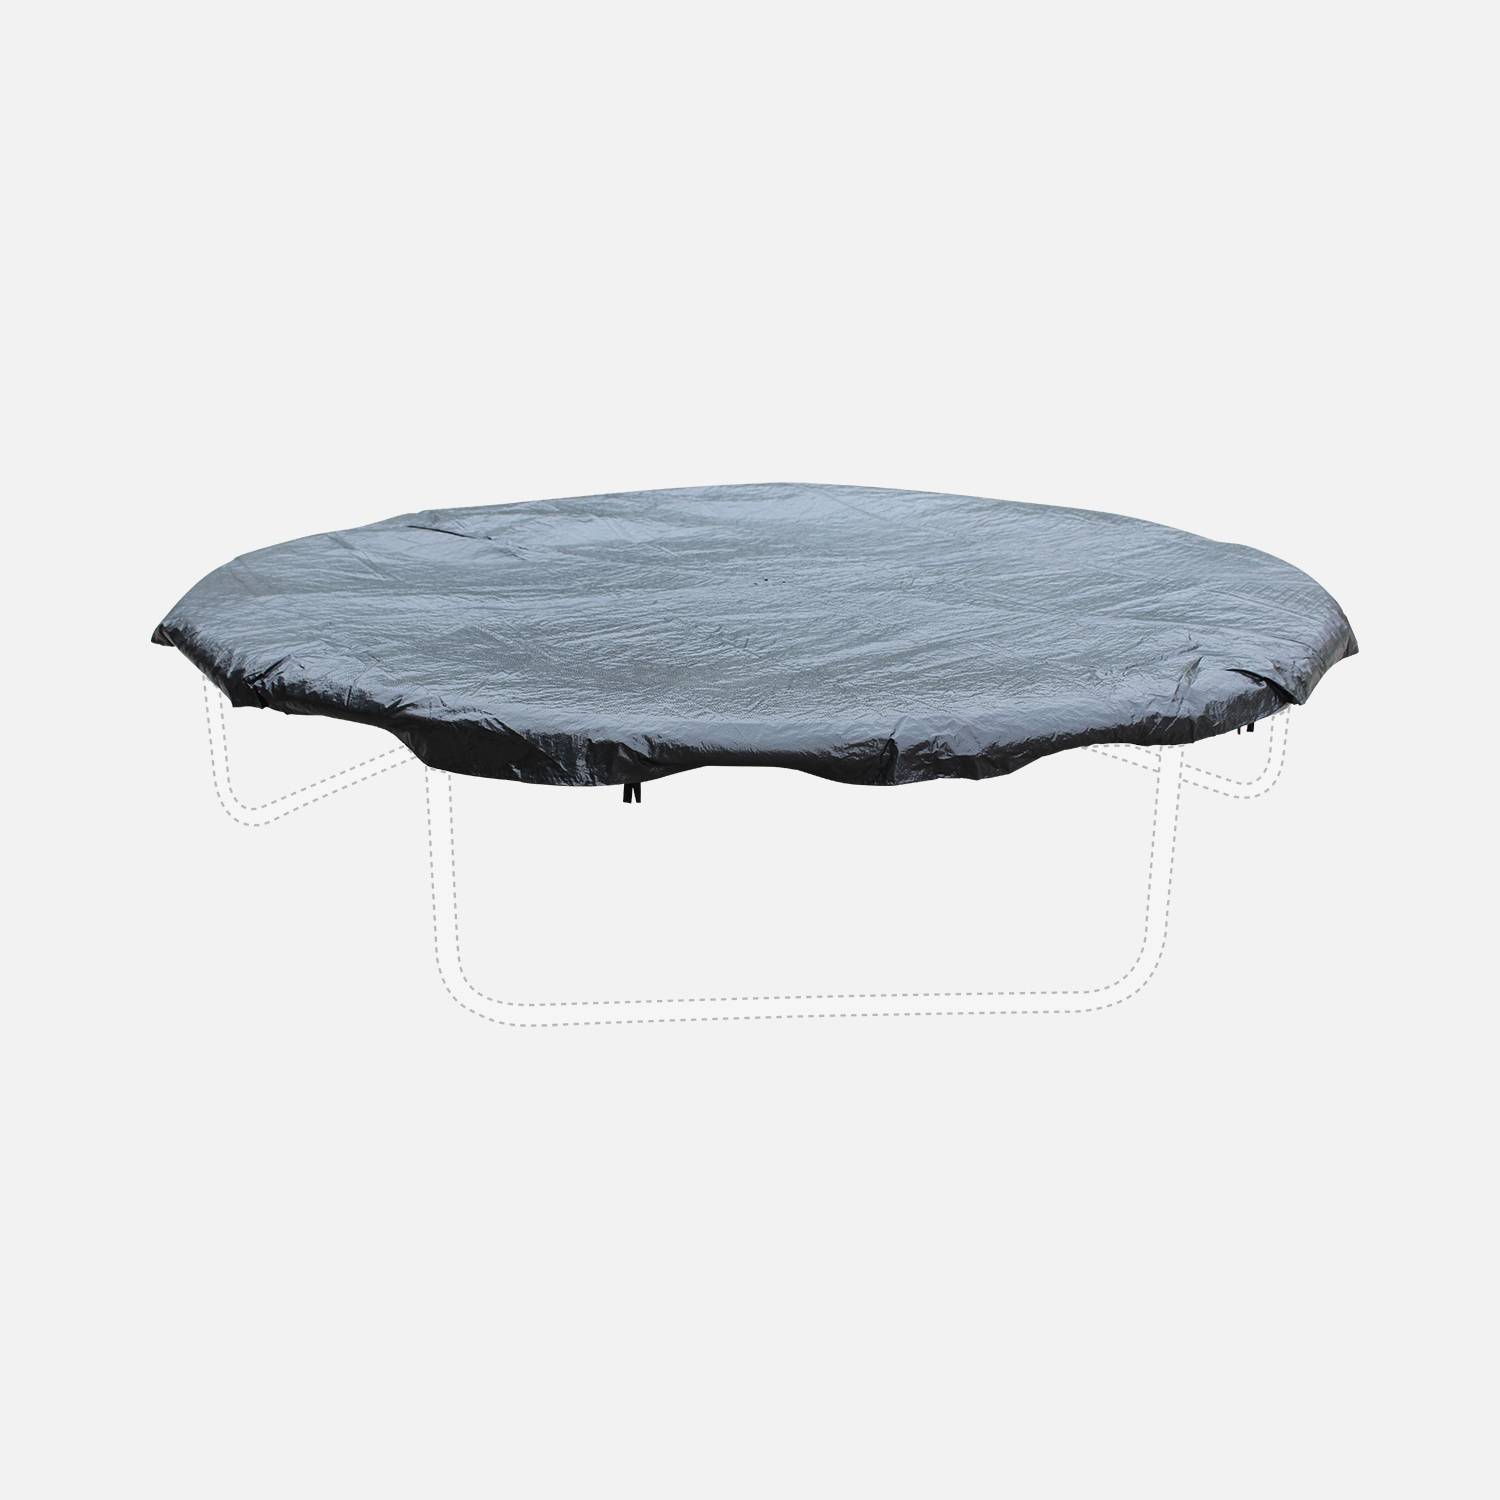 Trampoline cover 305cm - fits trampolines of all brands Photo1